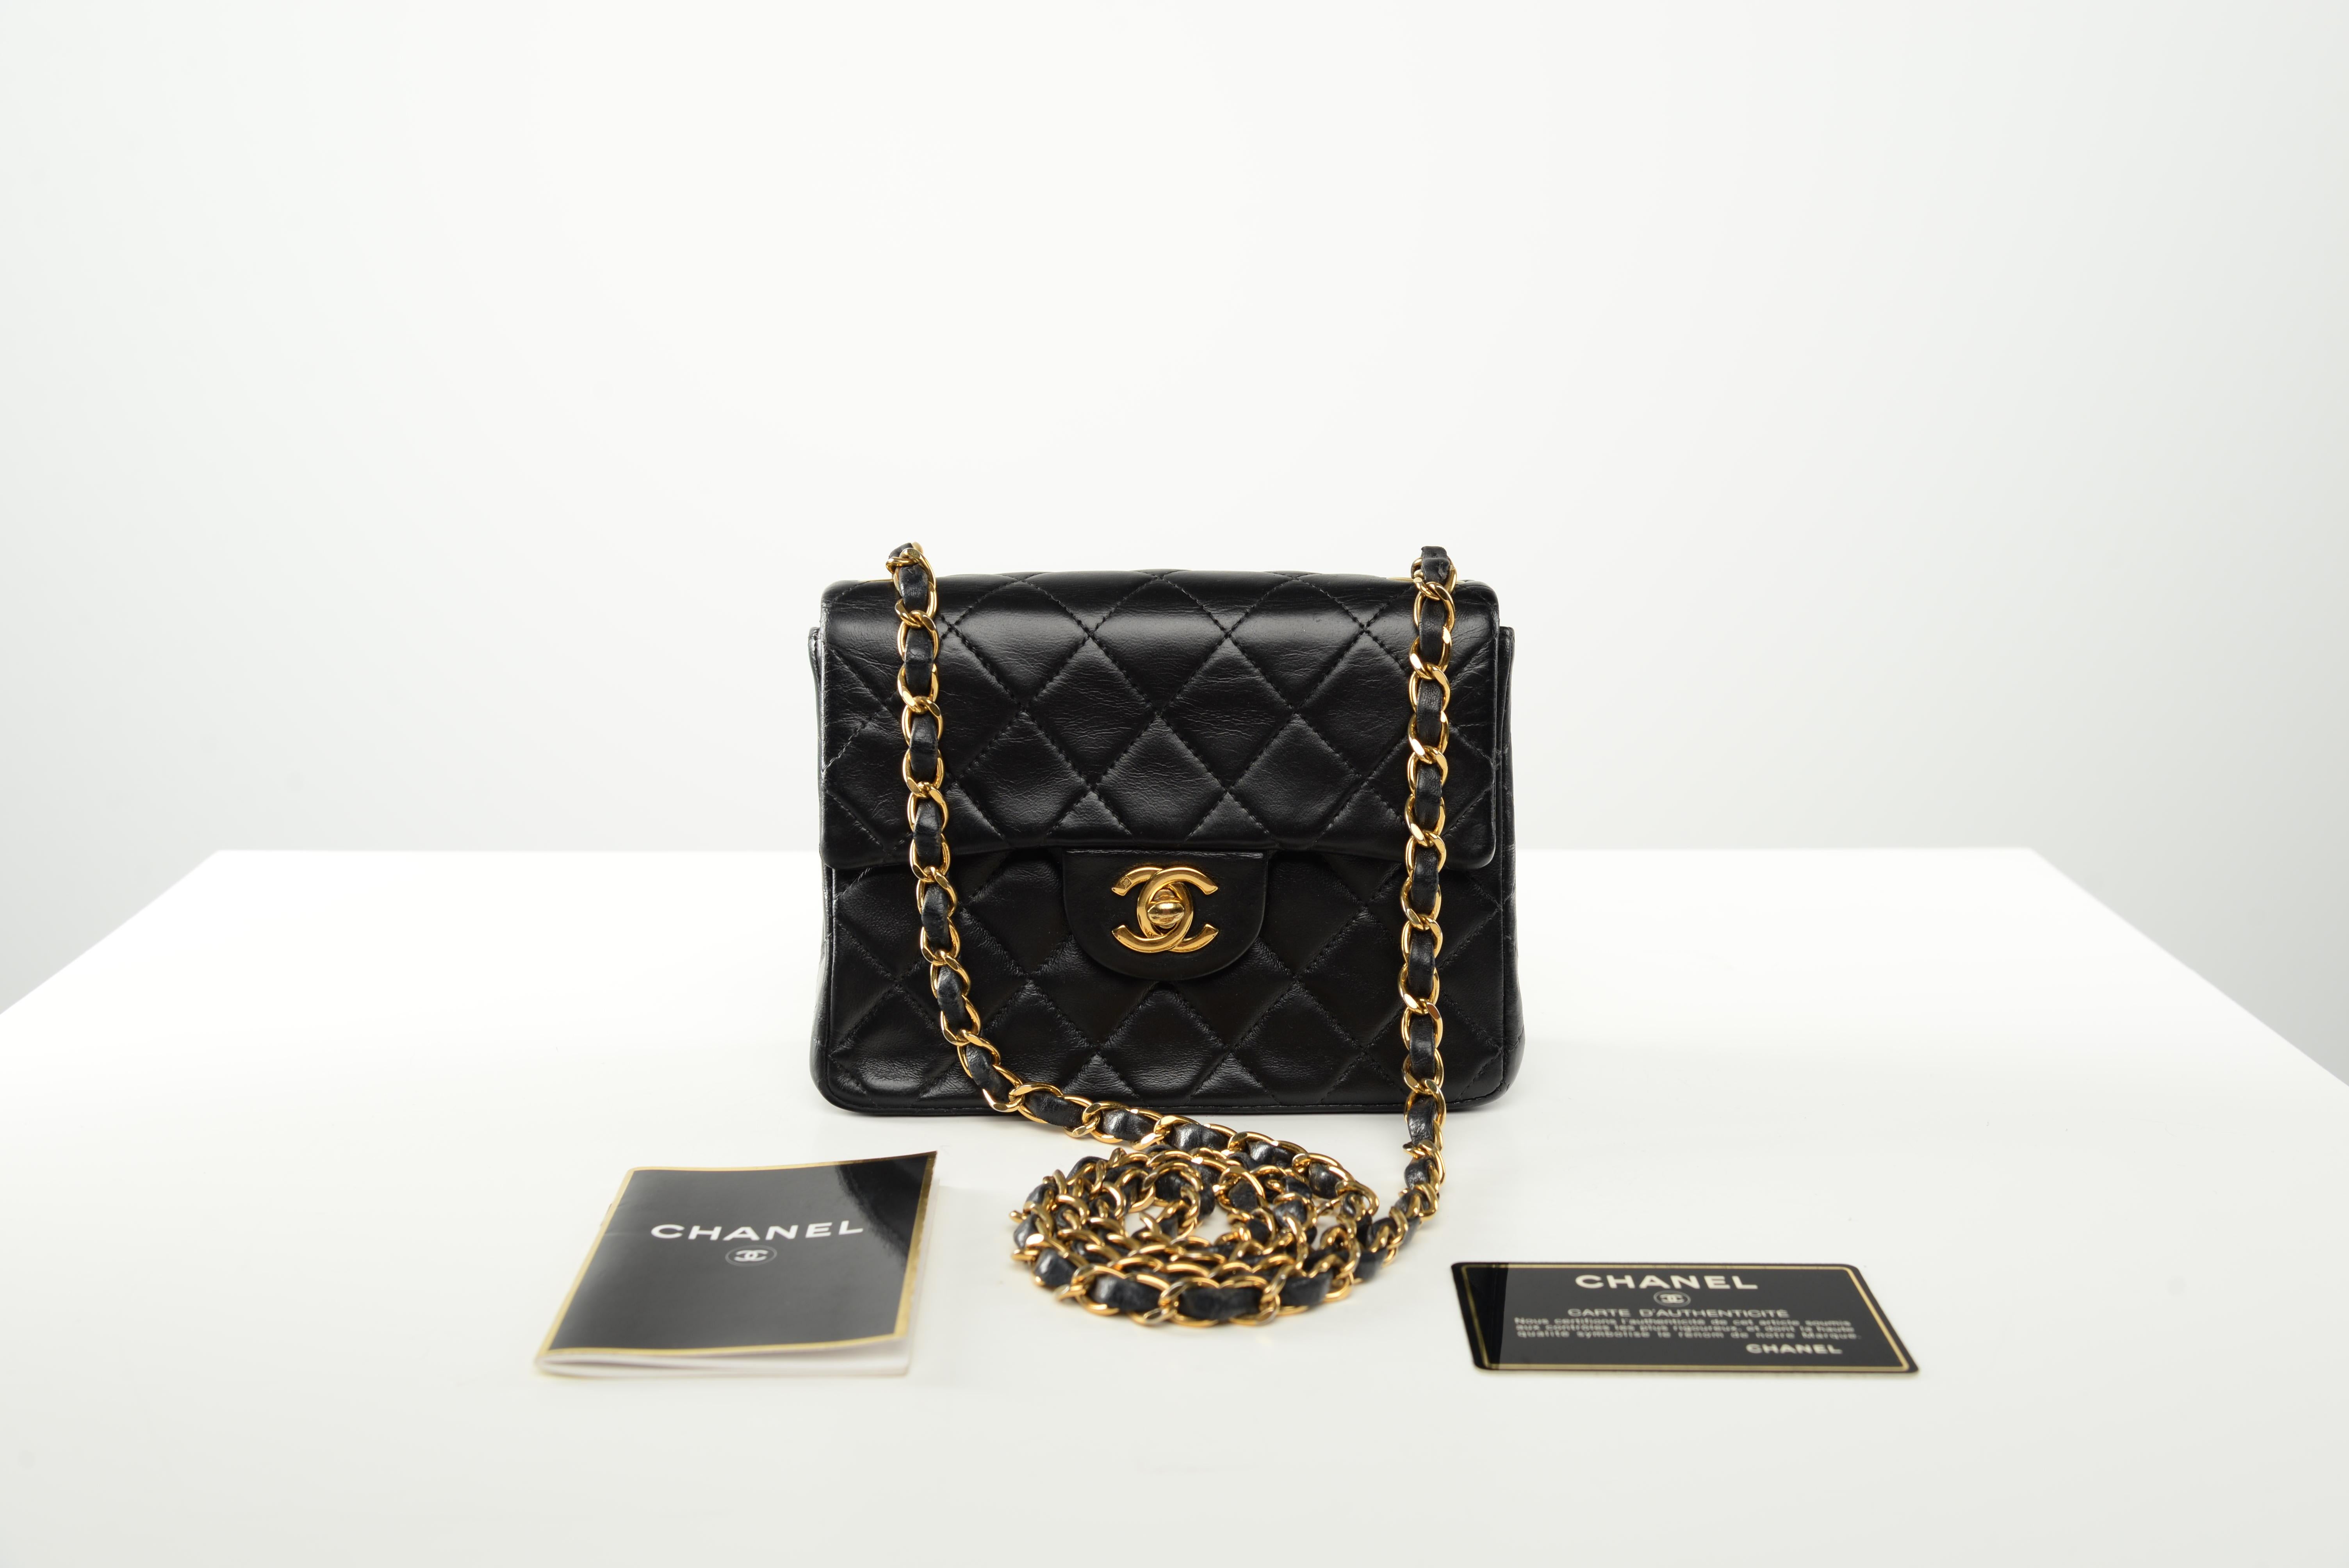 From the collection of SAVINETI we offer this Chanel Mini Square 7:
-	Brand: Chanel
-	Model: Mini Square 7
-	Year: 2000-2001
-	Code: 6519438
-	Condition: Good vintage condition
-	Materials: Lambskin leather, 24k gold-plated hardware
-	Extras: